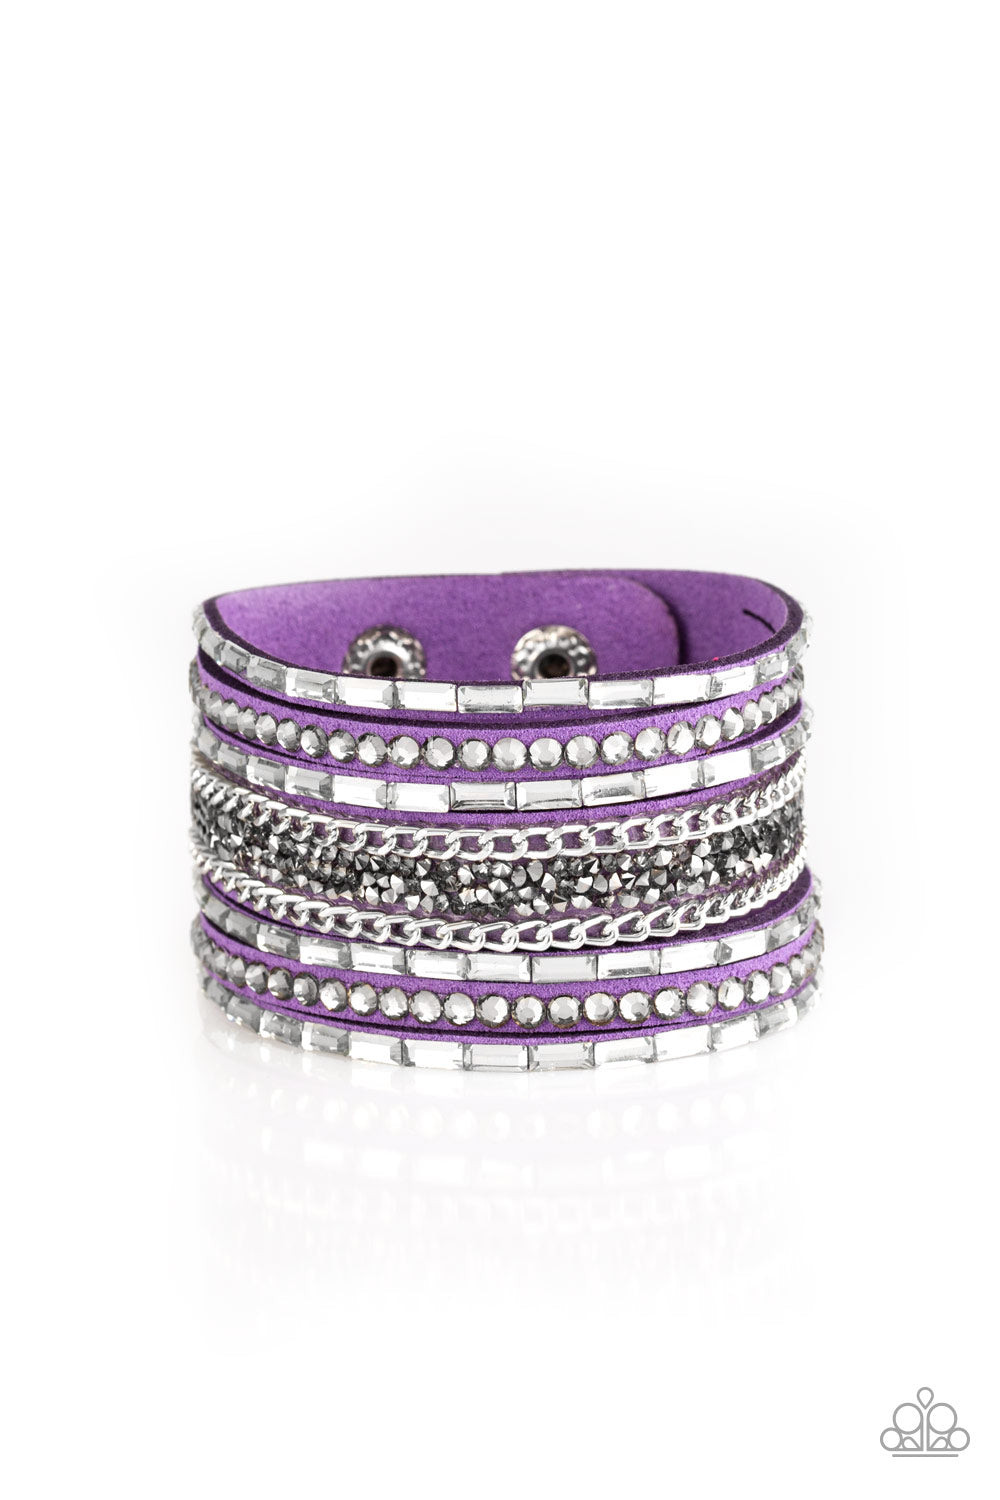 White emerald-cut rhinestones, smoky round rhinestones, and metallic prism-shaped rhinestones are sprinkled along strands of vivacious purple suede. Shimmery silver chain is added to the mix for a sassy industrial finish. Features an adjustable snap closure.